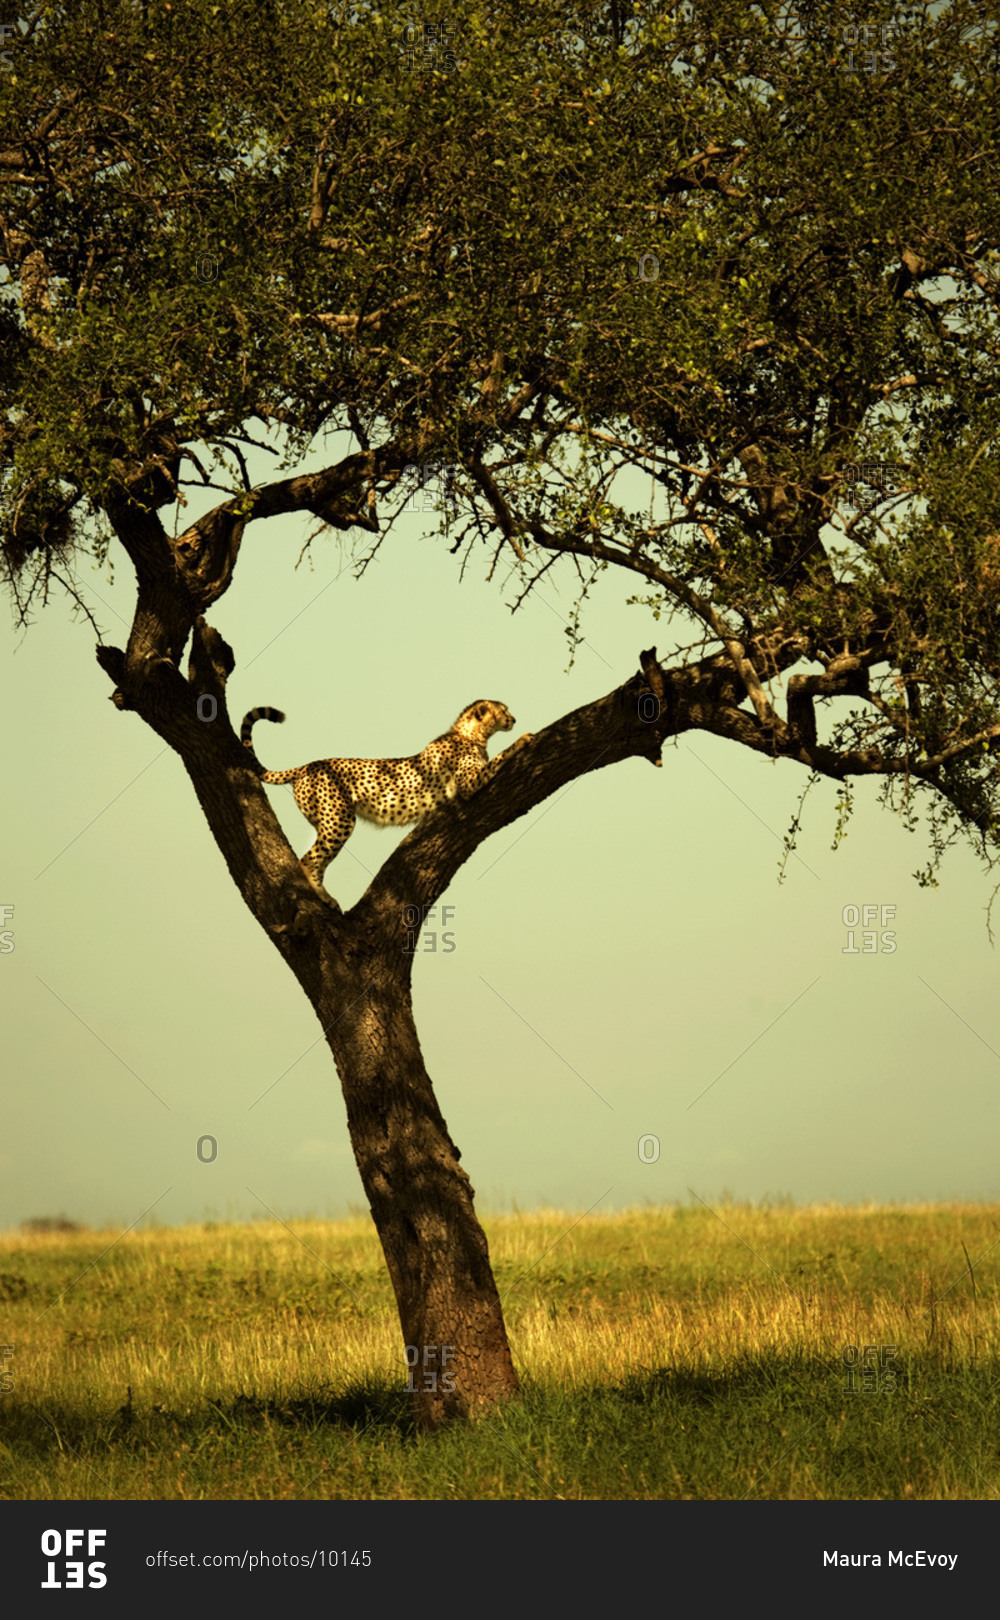 Leopard positioned between branches in tree on Serengeti Plains